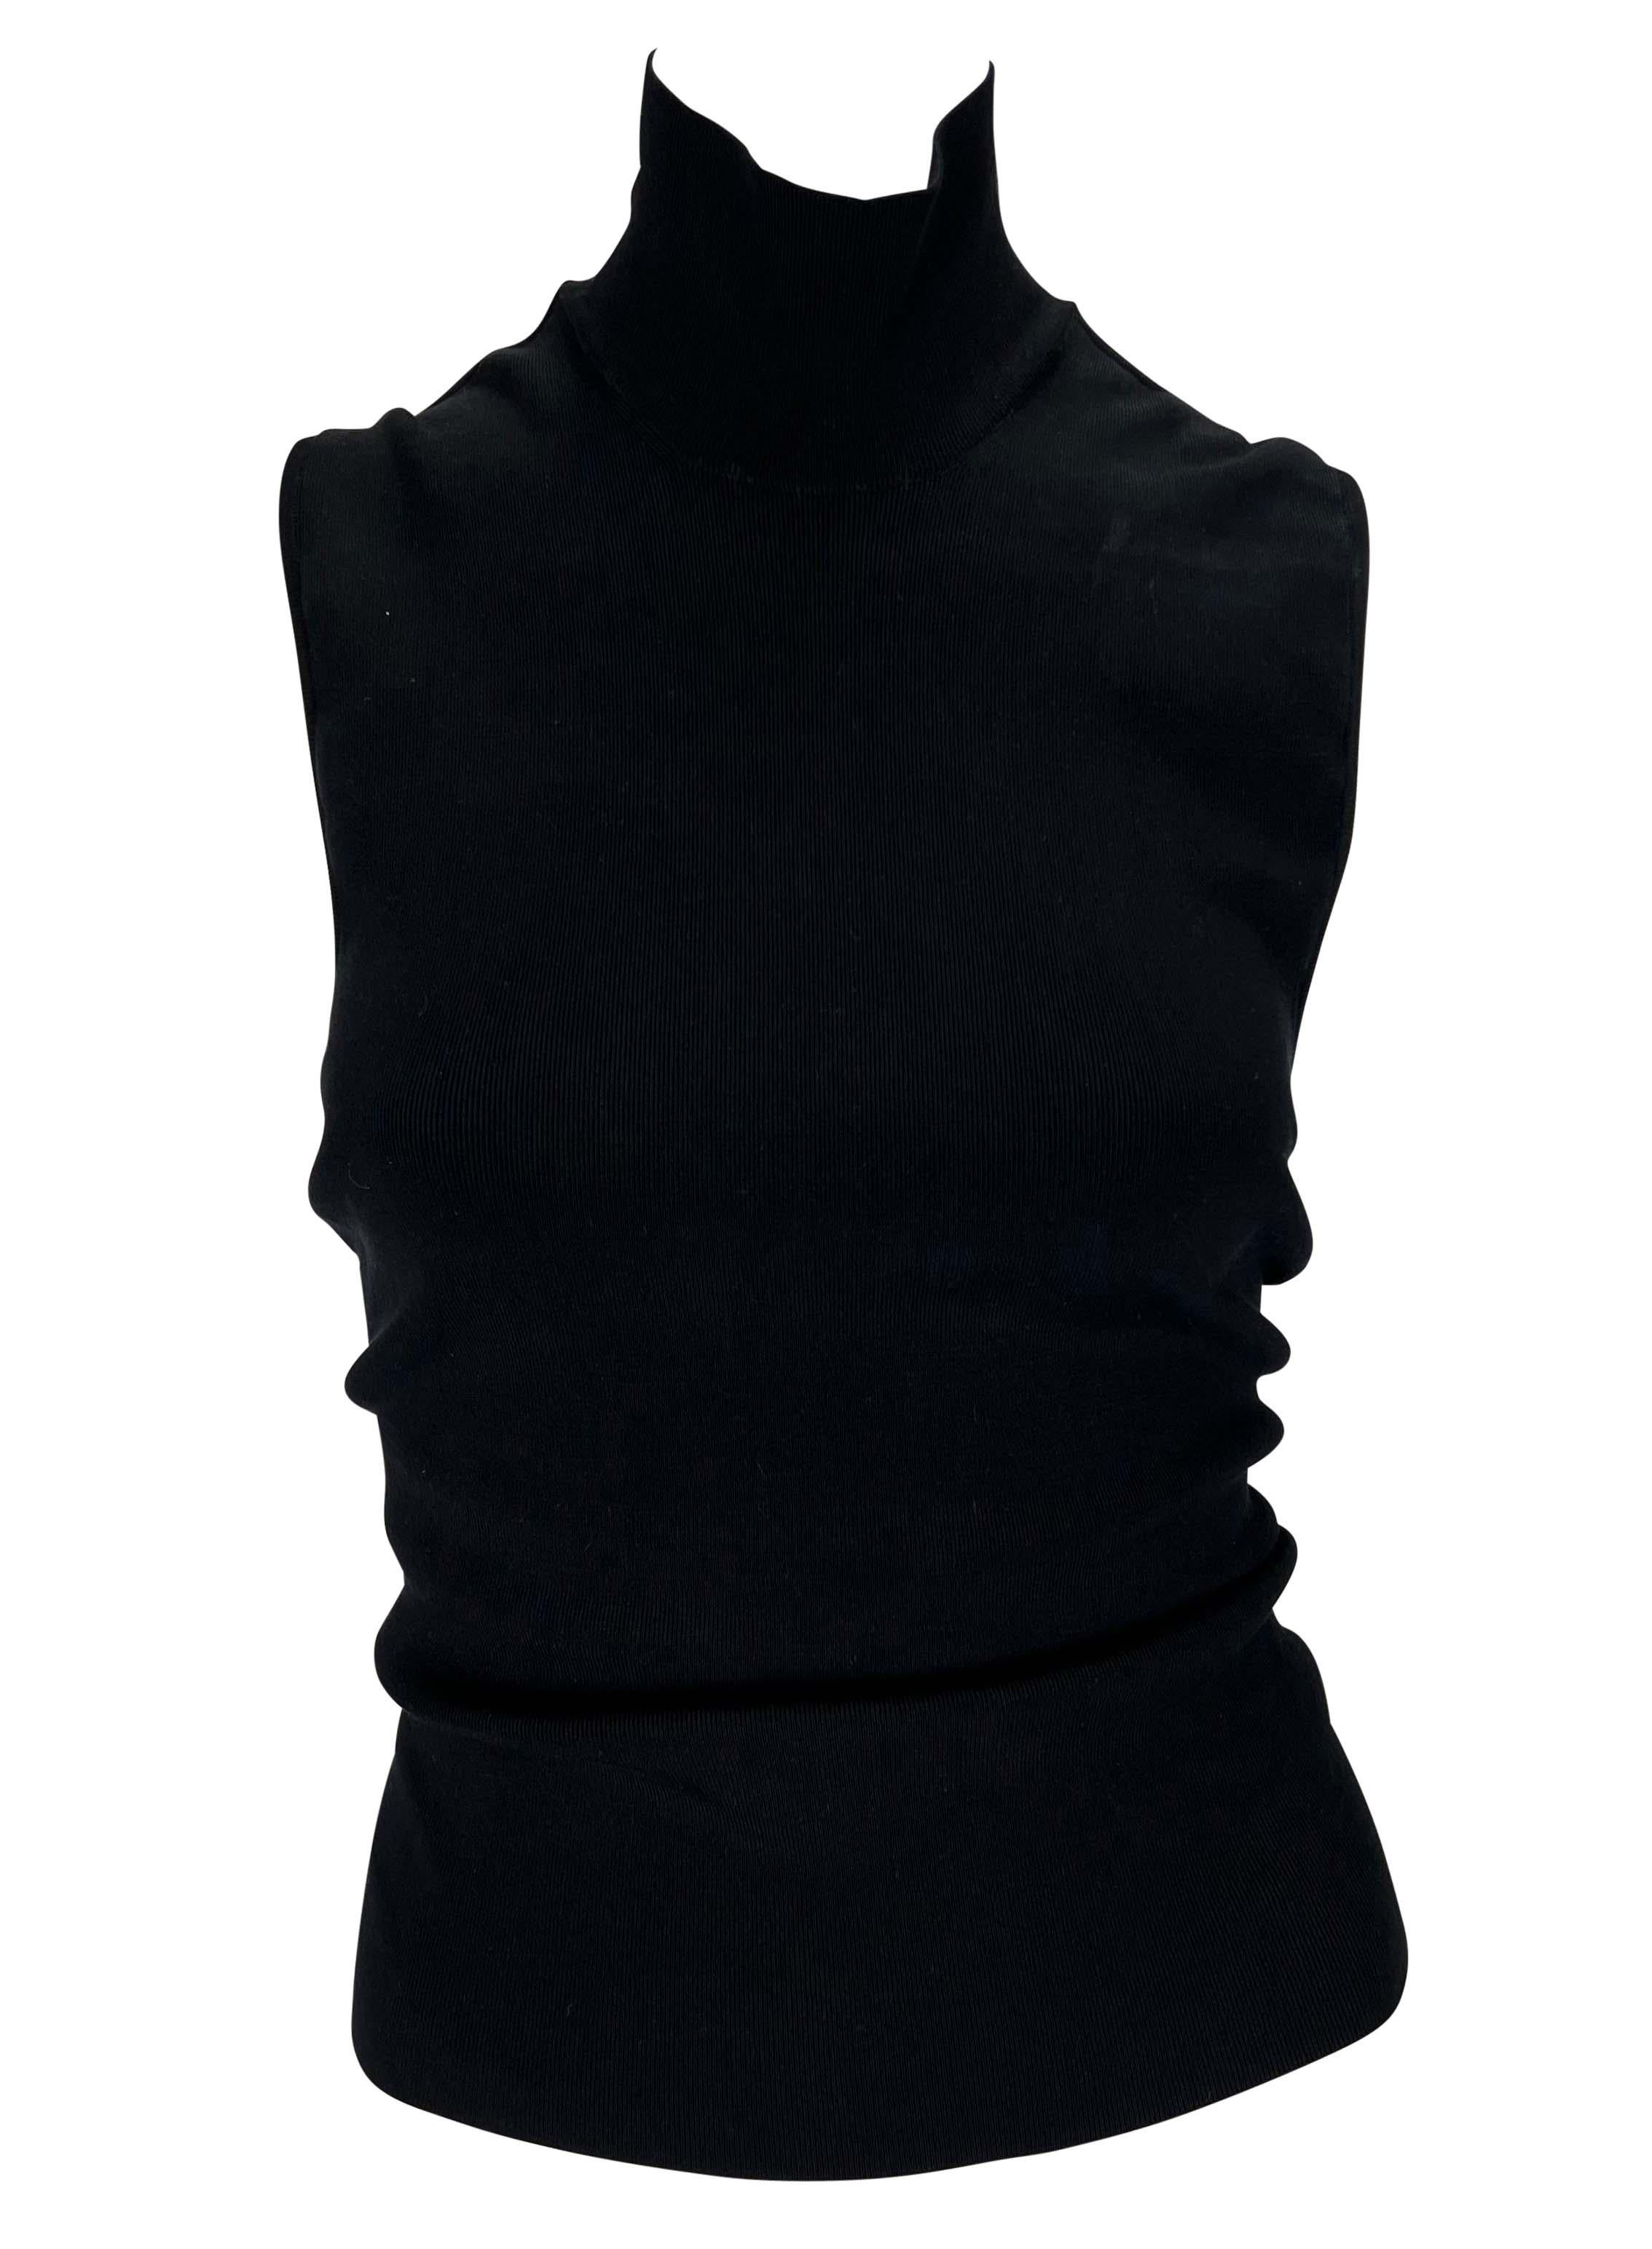 2000s Gucci by Tom Ford Backless Stretch Silk Knit Mock Neck Black Crop Top In Good Condition In West Hollywood, CA